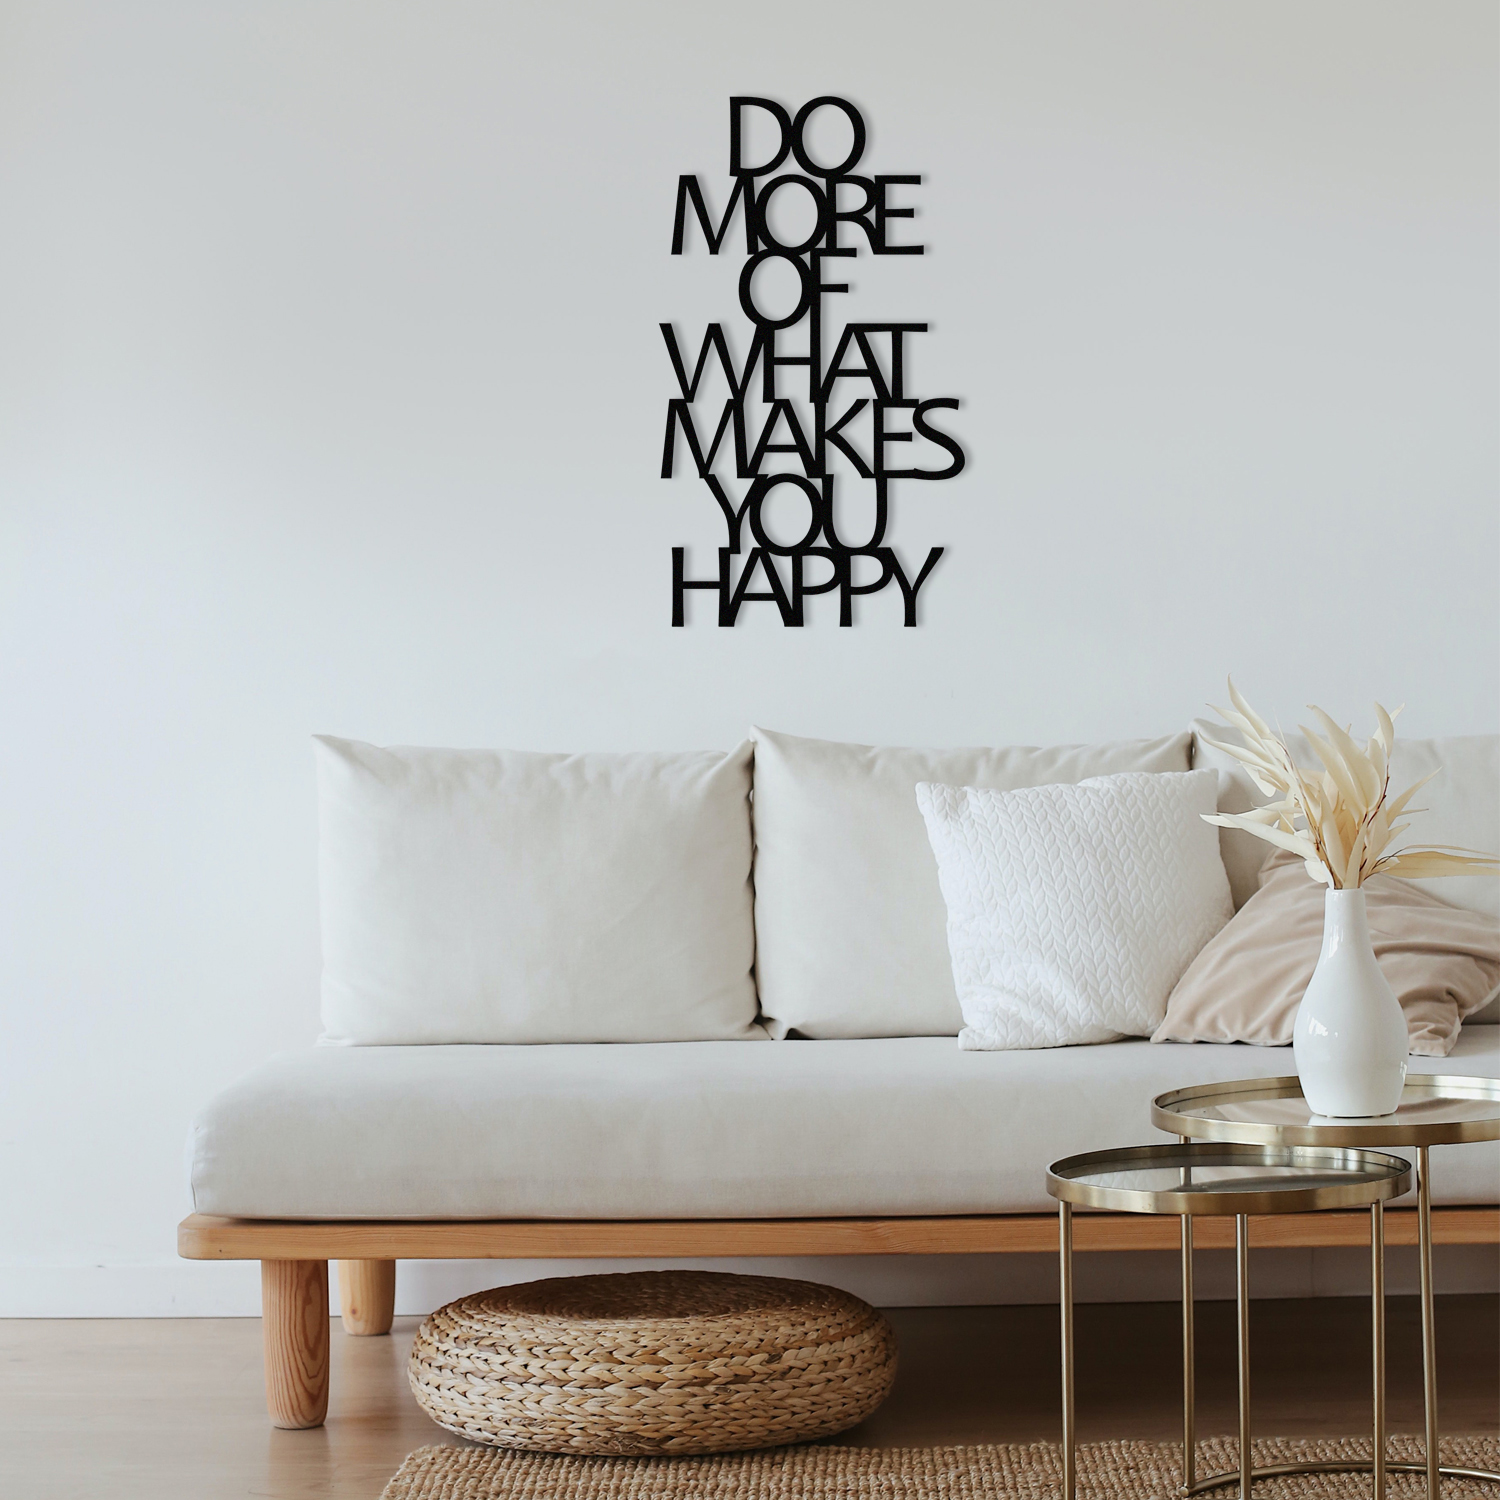 DO MORE OF WHAT MAKES YOU HAPPY METAL DECOR